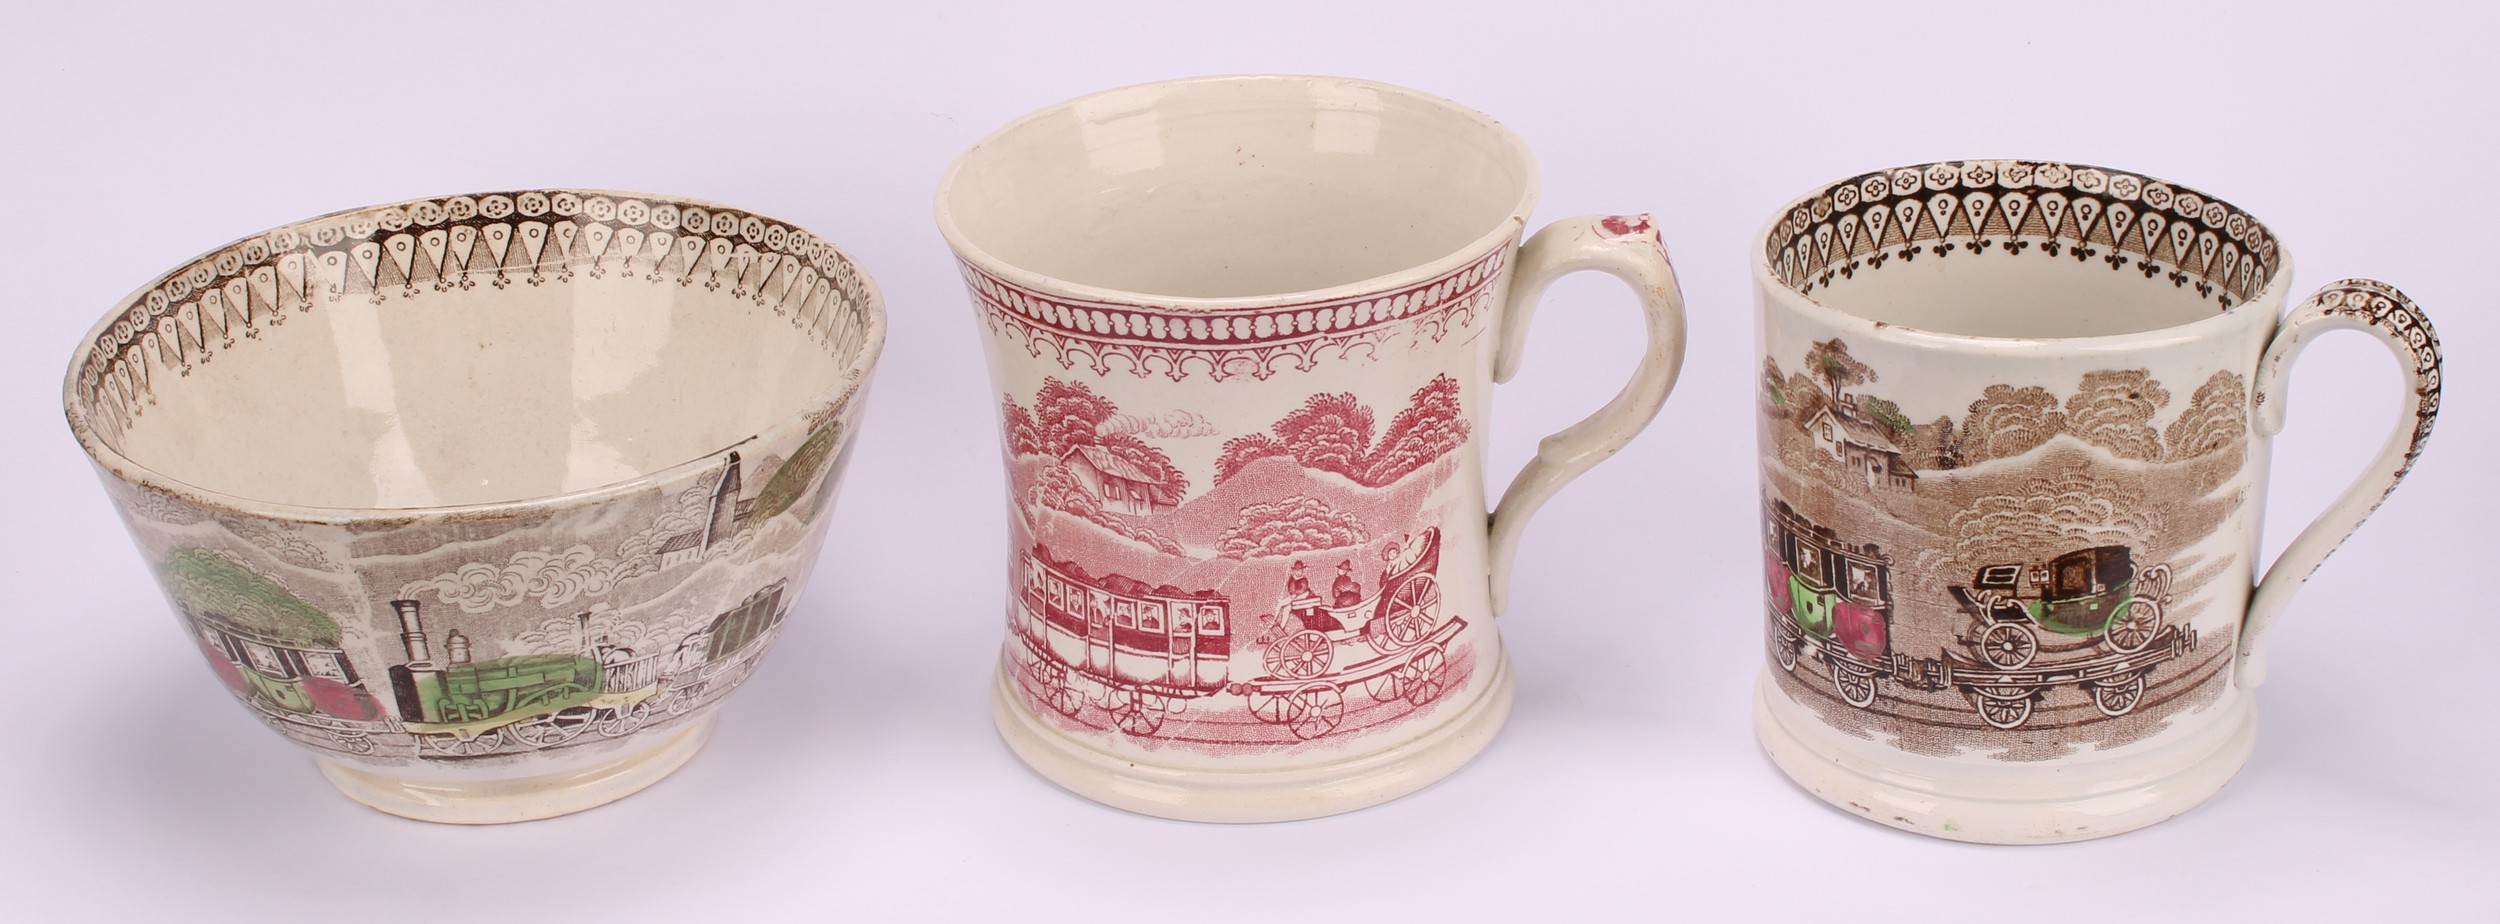 Railway Interest - steam locomotives, a 19th century Staffordshire pearlware mug, printed in sepia - Image 2 of 8